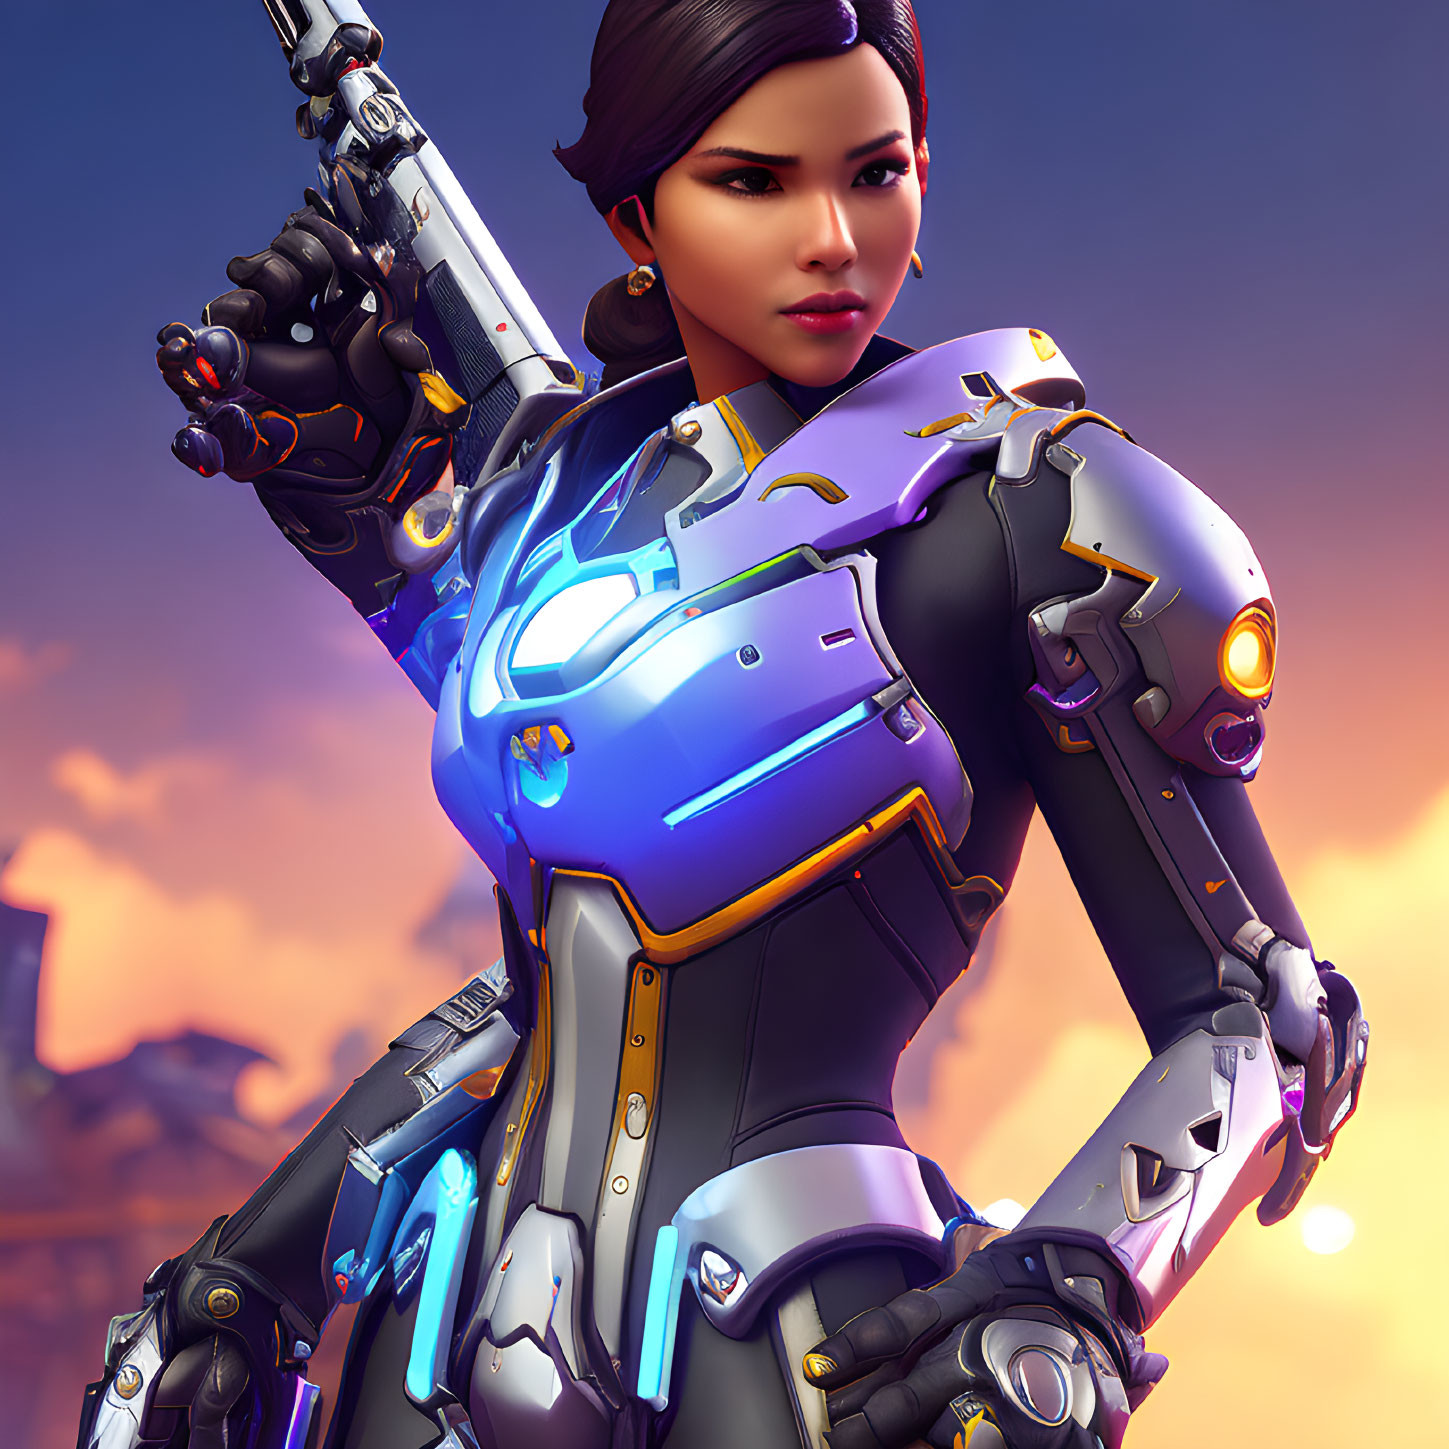 Short-haired female animated character in futuristic armor suit under dusk sky